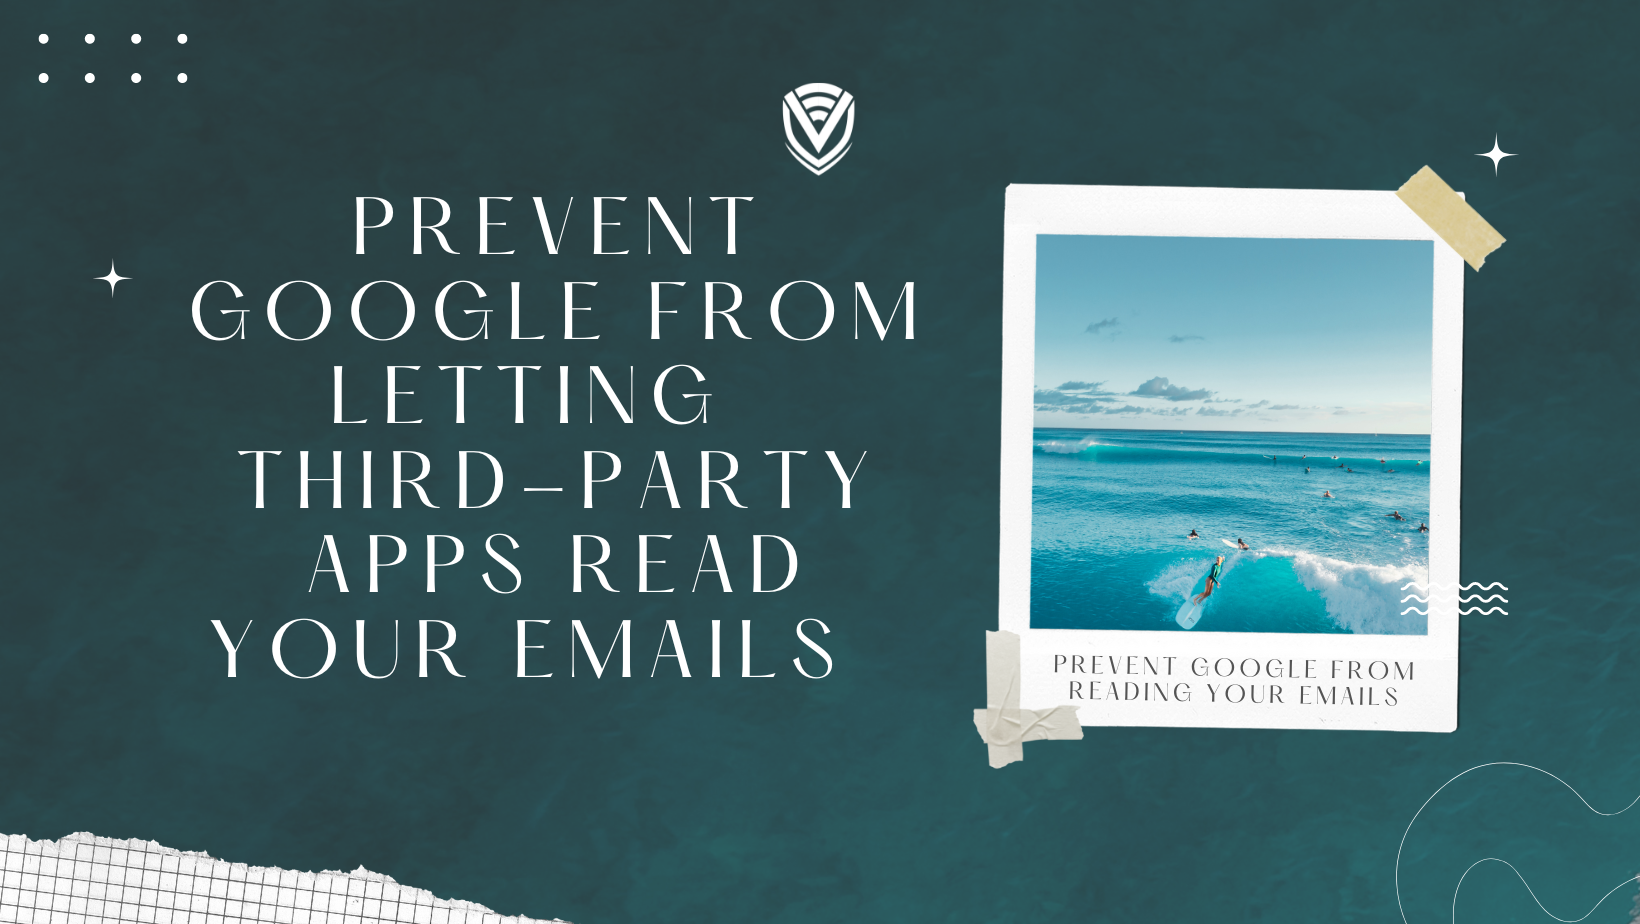 Prevent Google from Letting Third-Party Apps Read your Emails